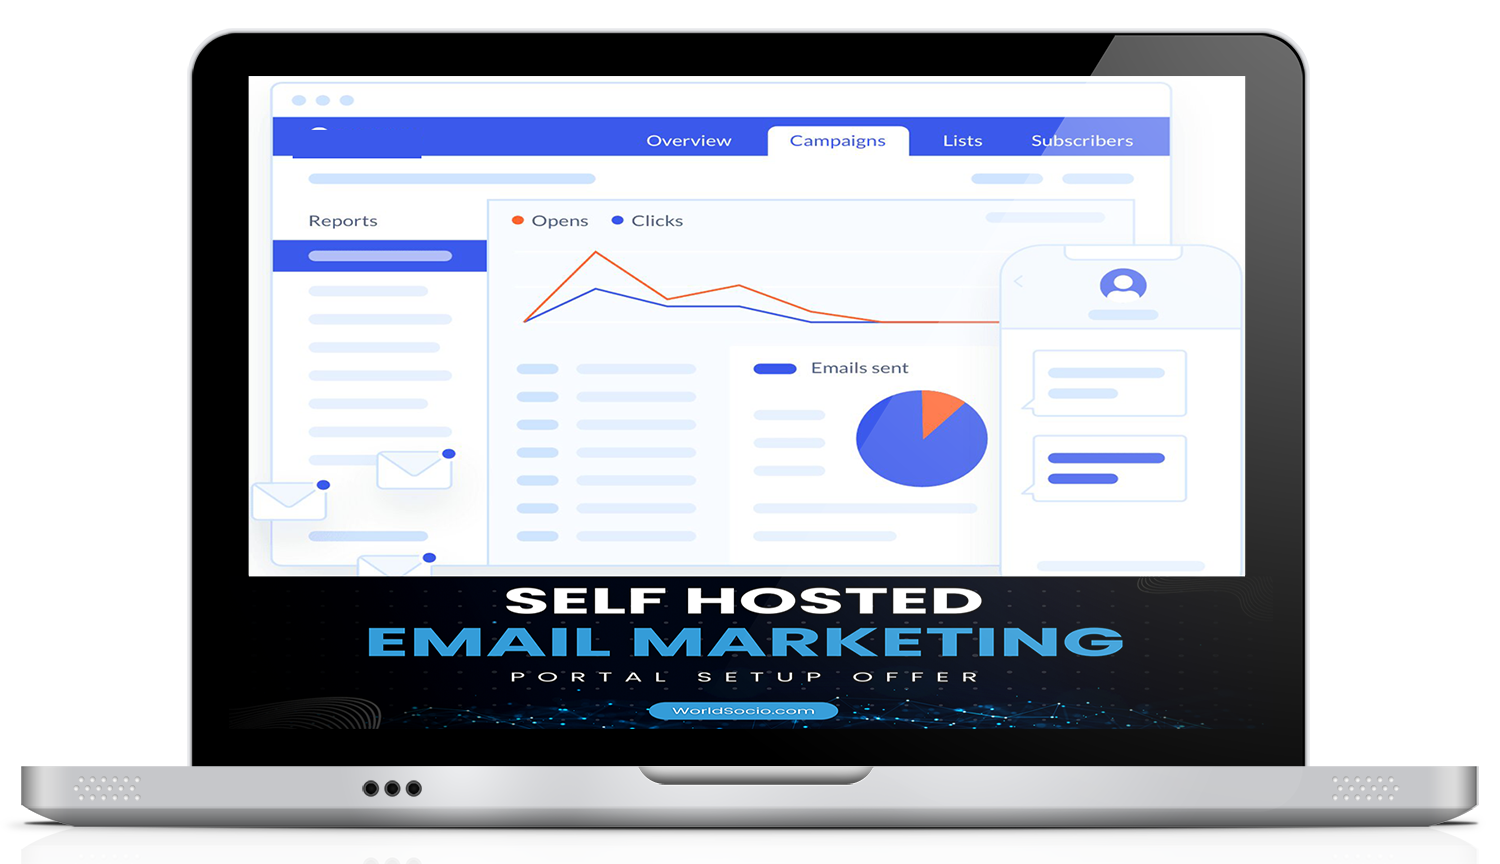 Self-hosted-email-marketing-portal-setup-offer,-by-mbonu-watson.-world-socio.png